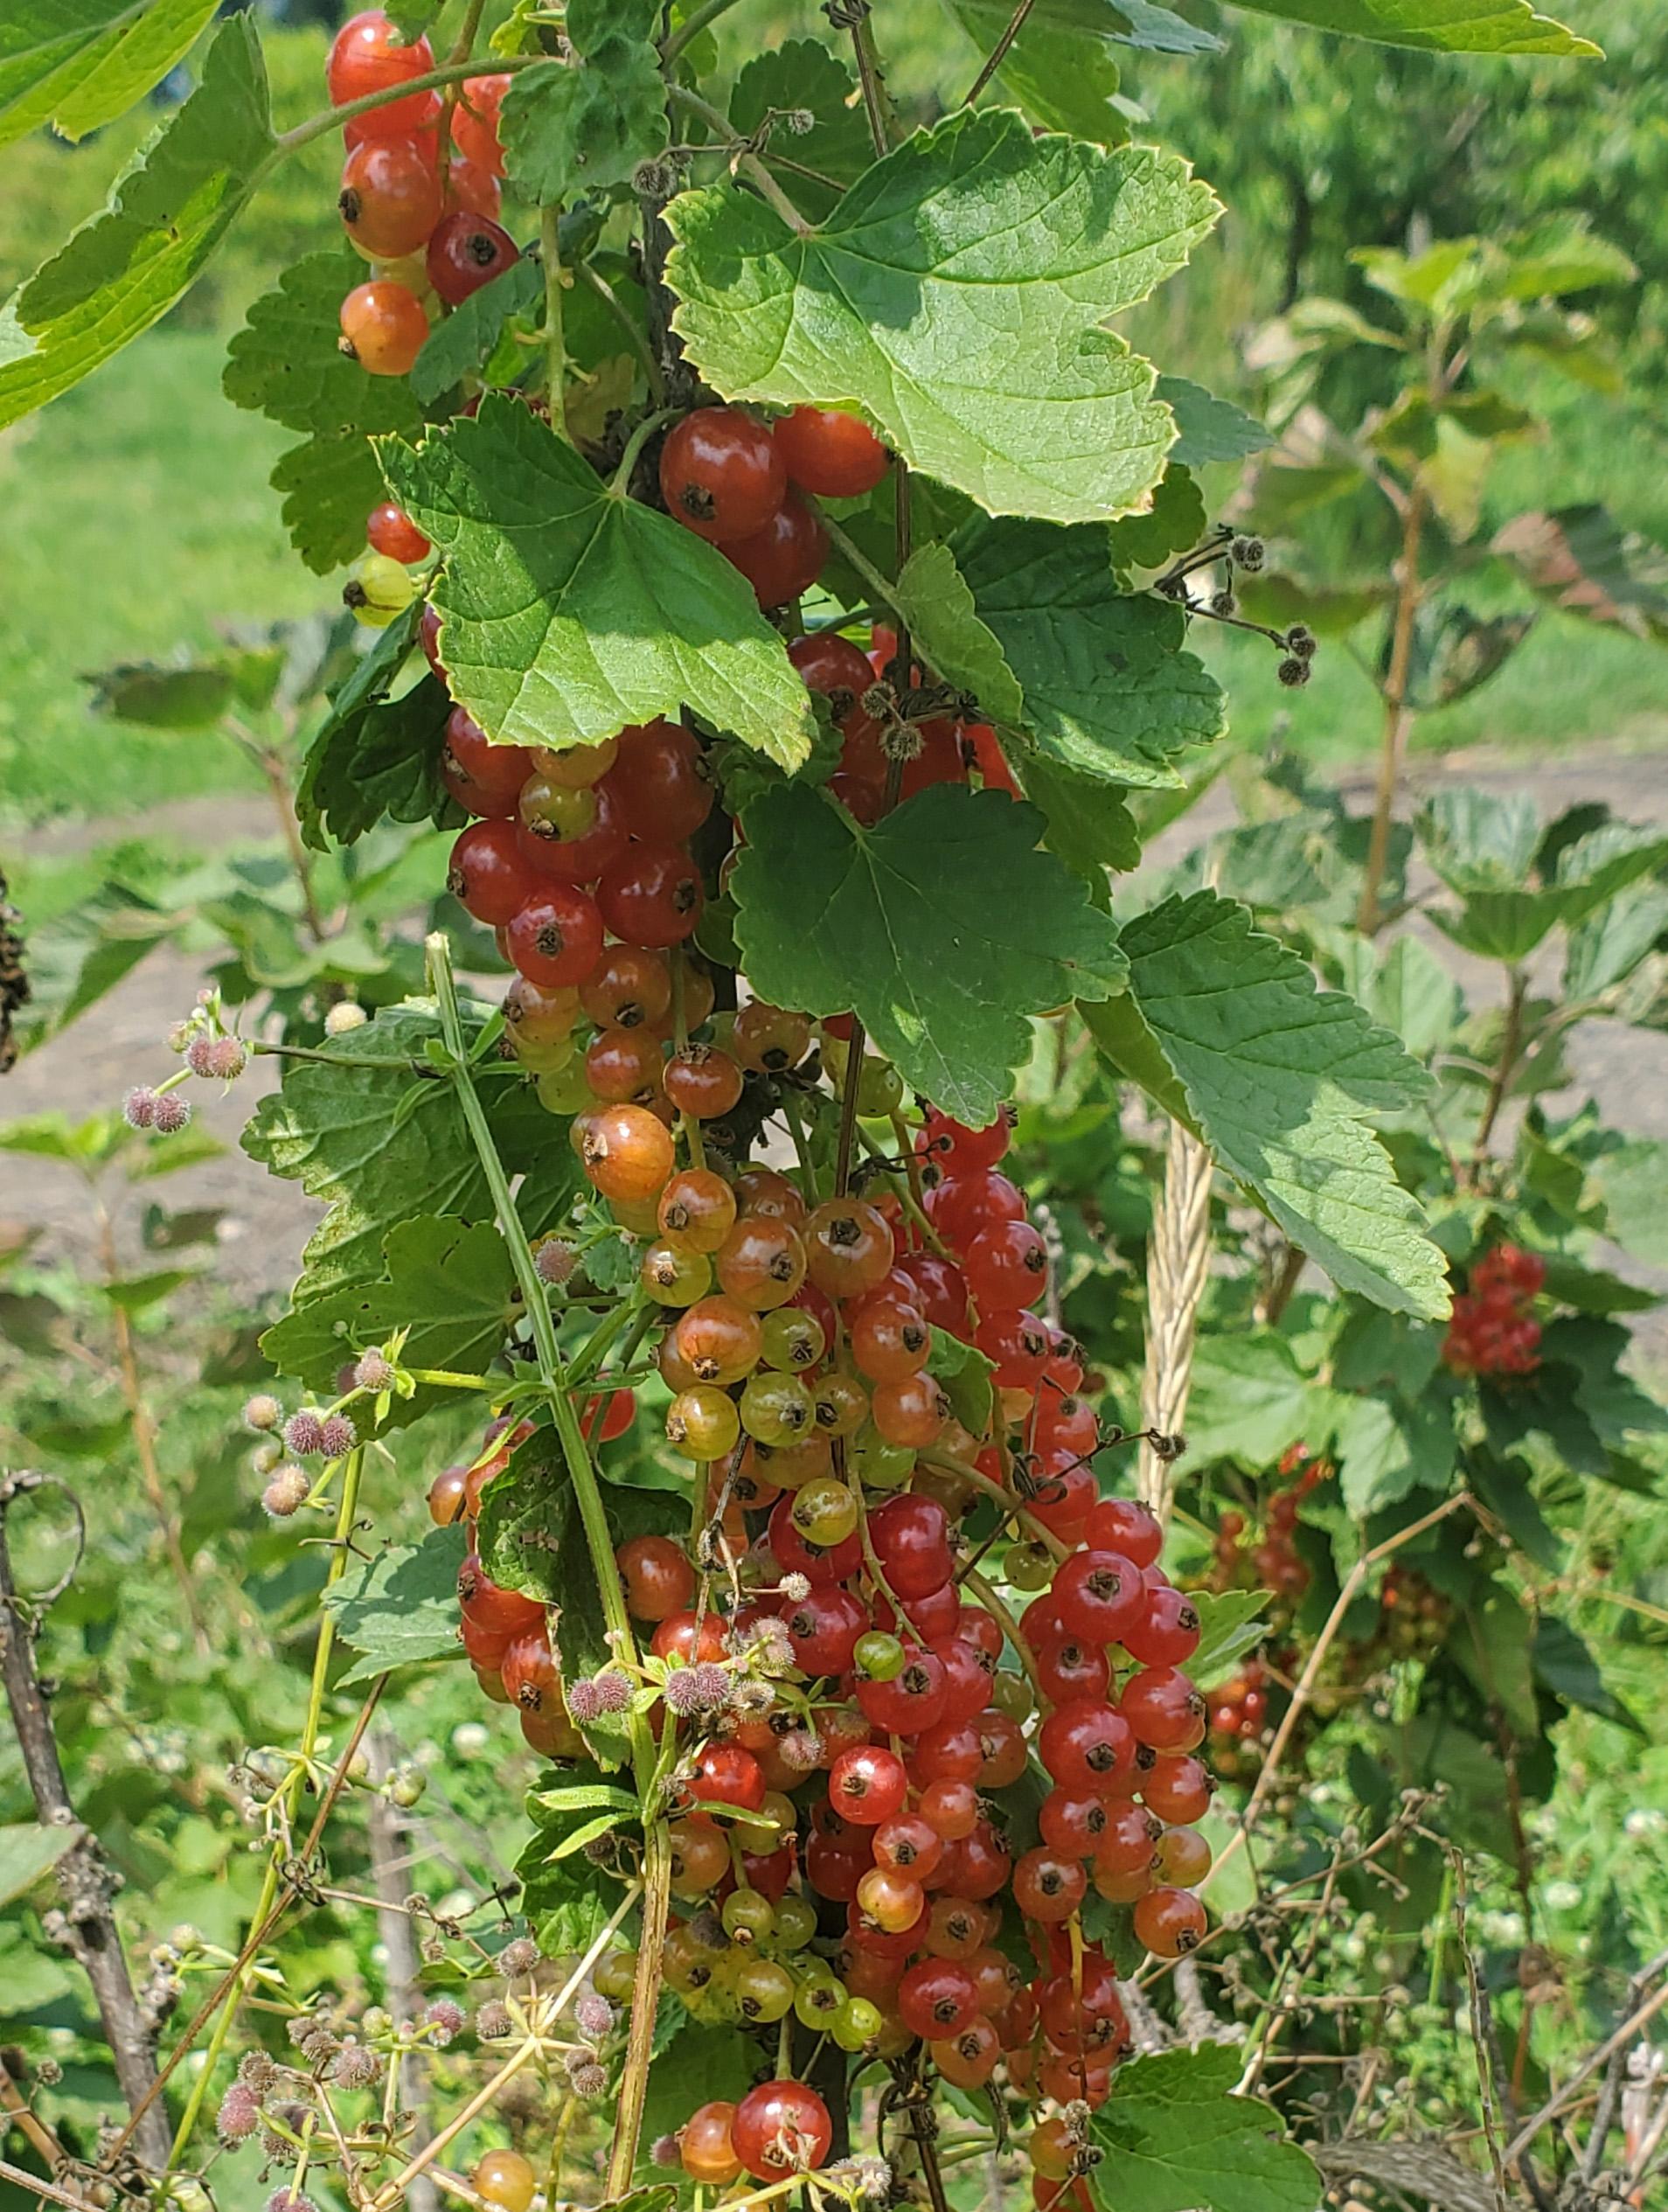 Red currants ready for harvest.